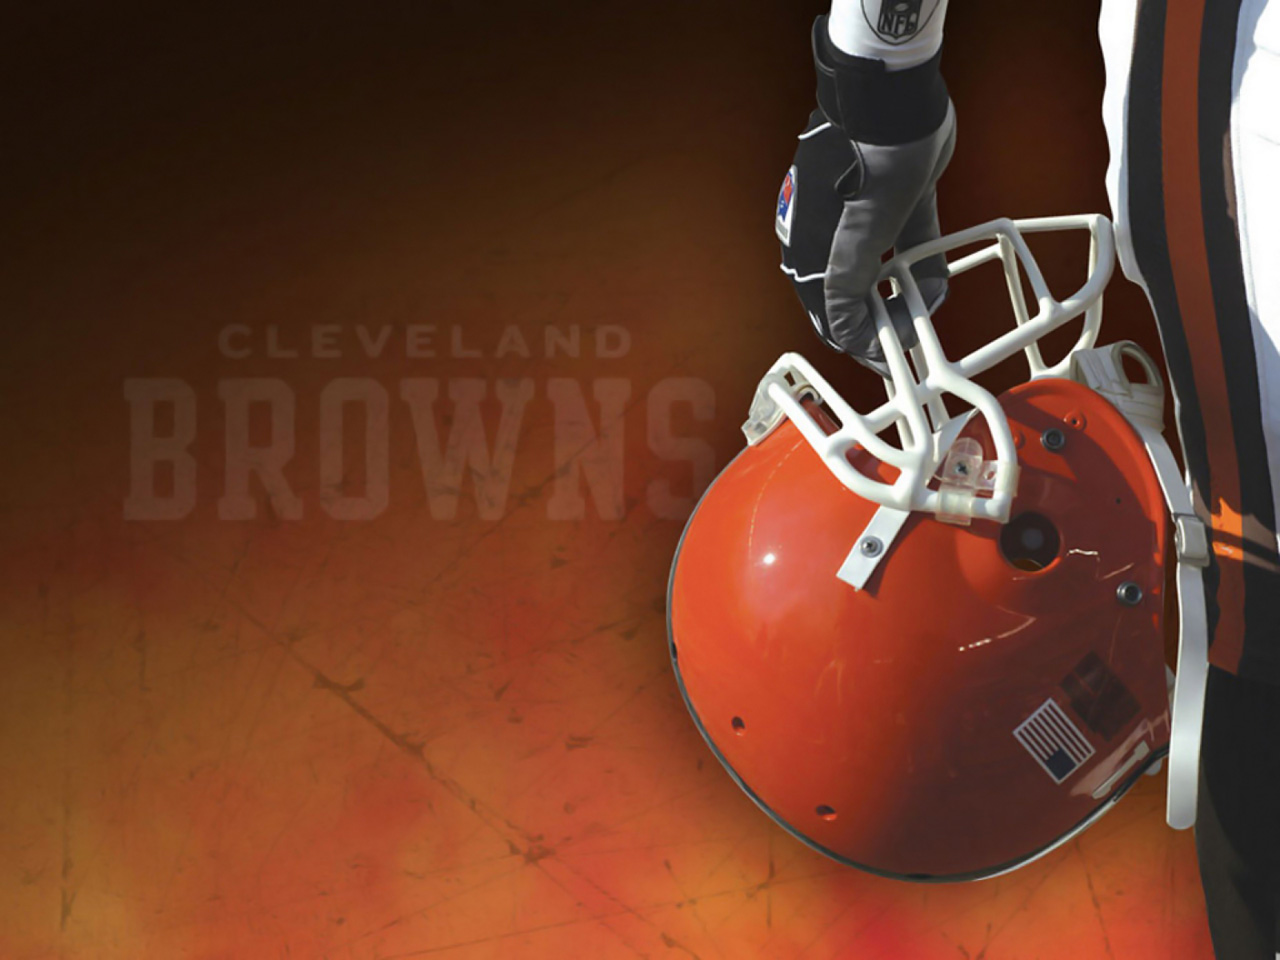 Cleveland Browns Wallpaper Collection Image Femalecelebrity